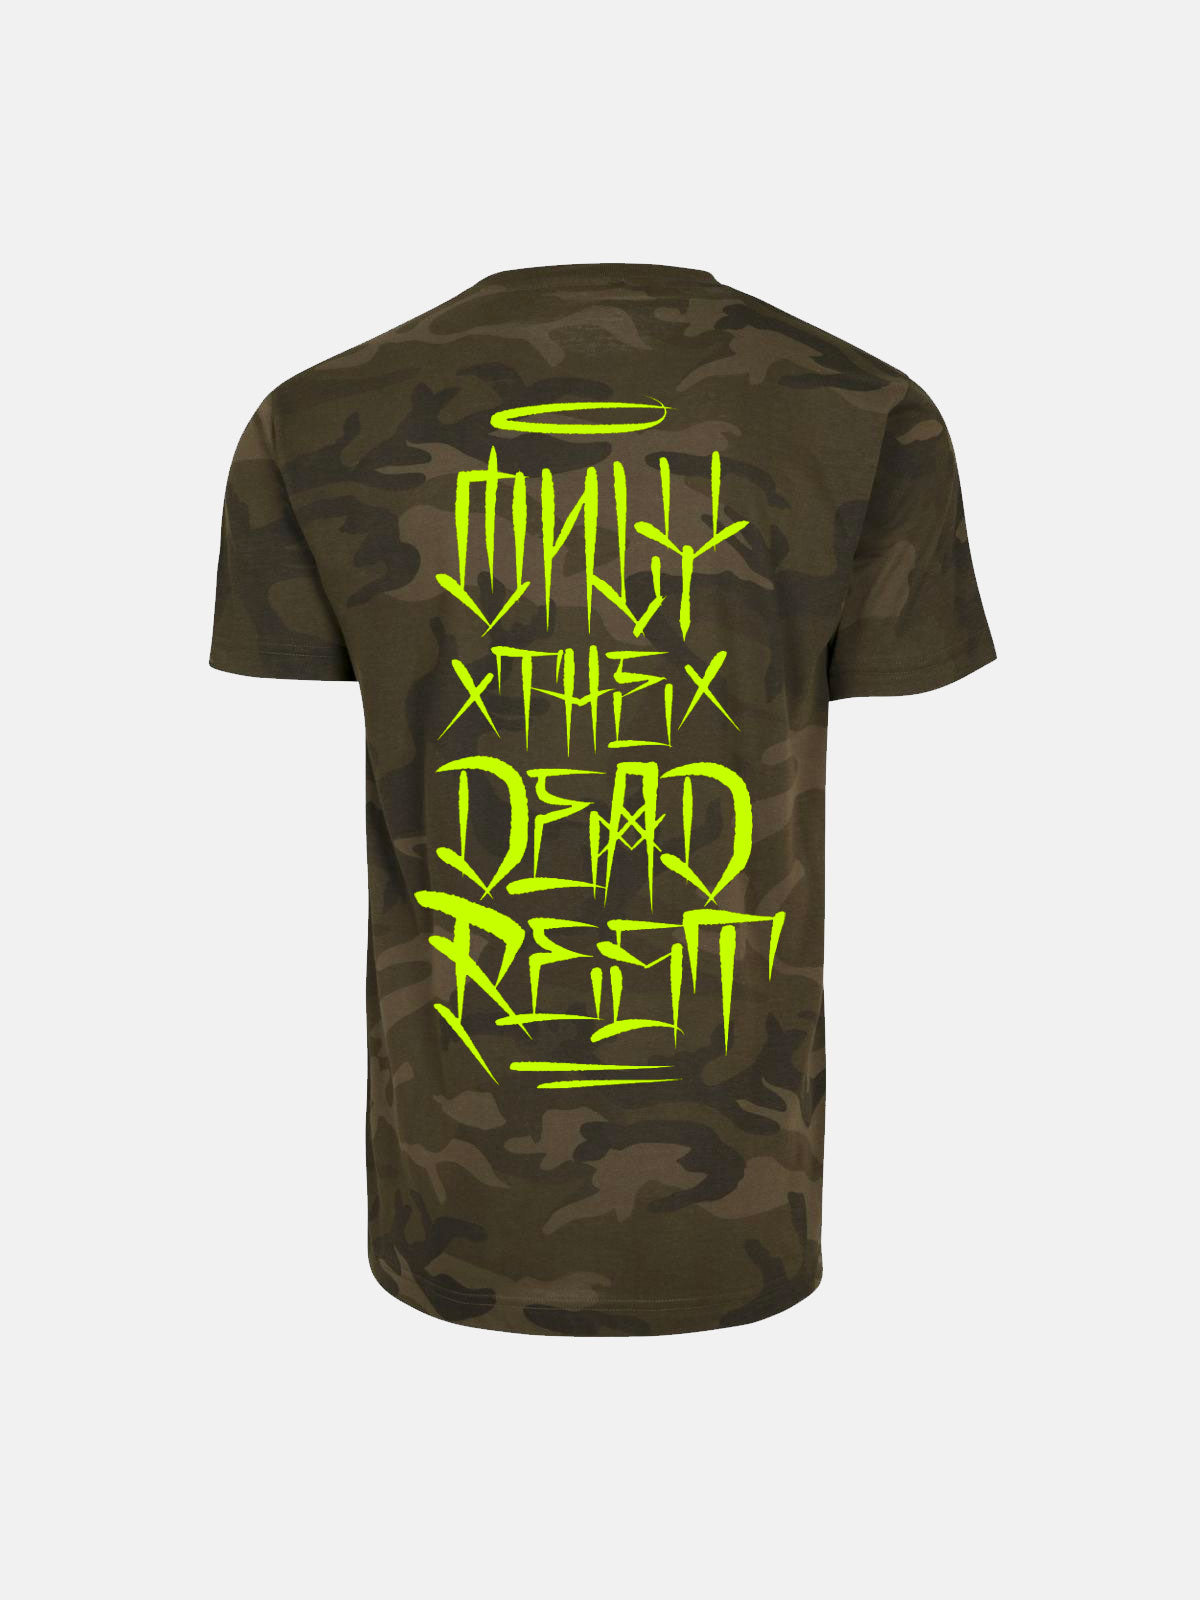 Only The Dead Rest Camo Tee - RIMFROST®